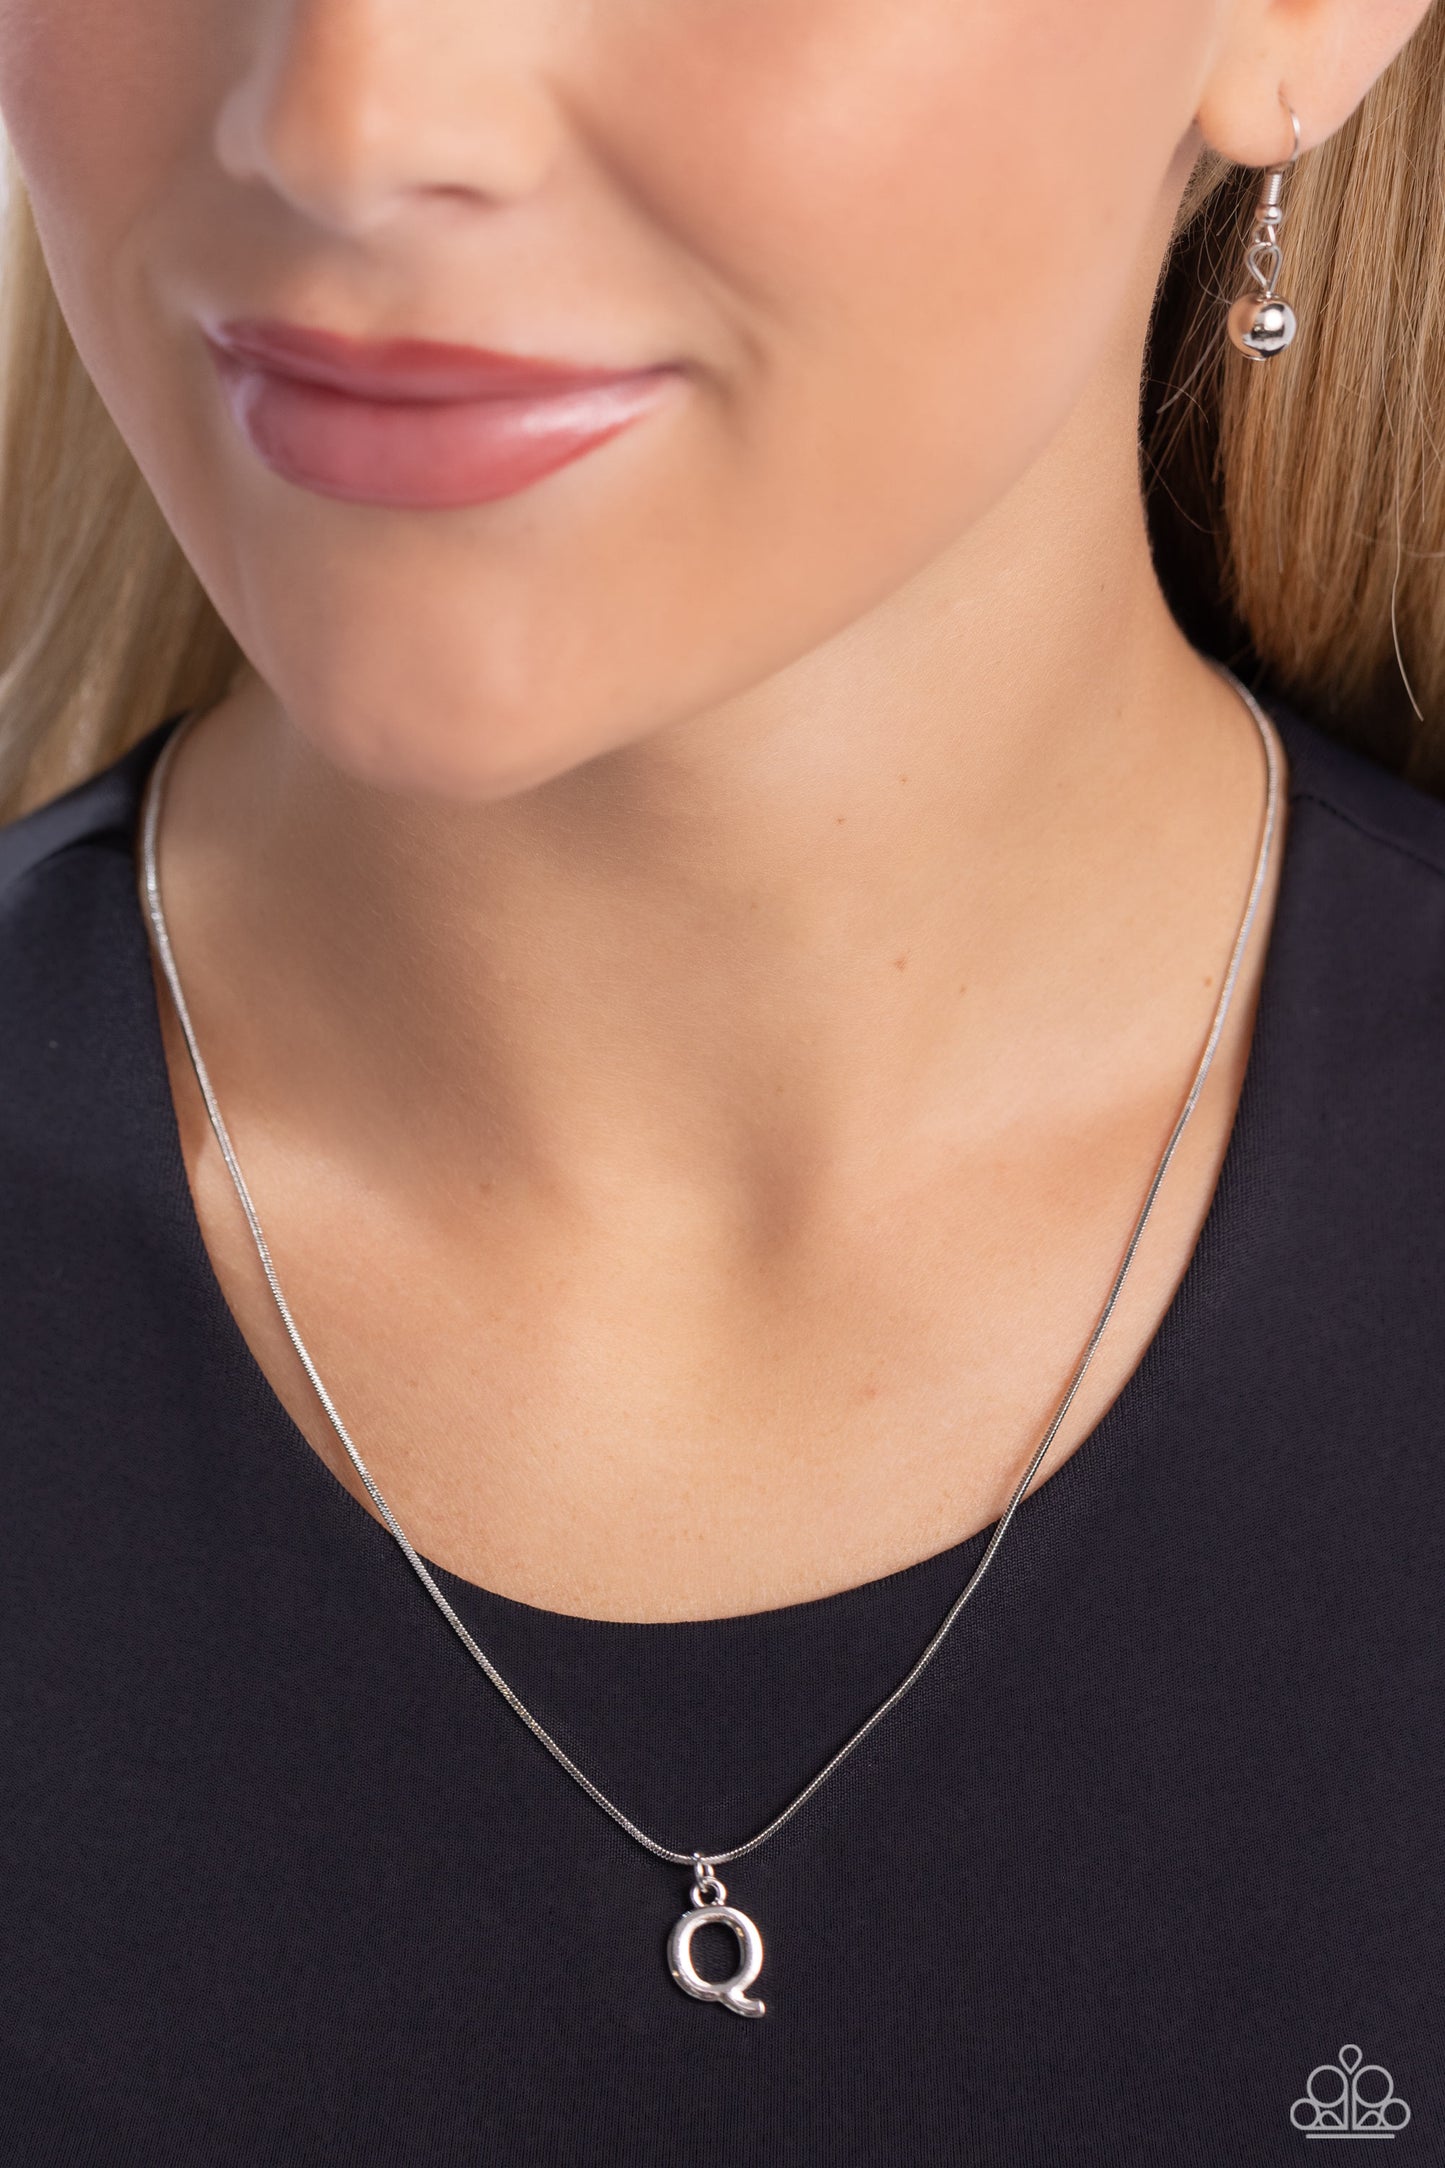 Seize the Initial - Silver - Q Necklace